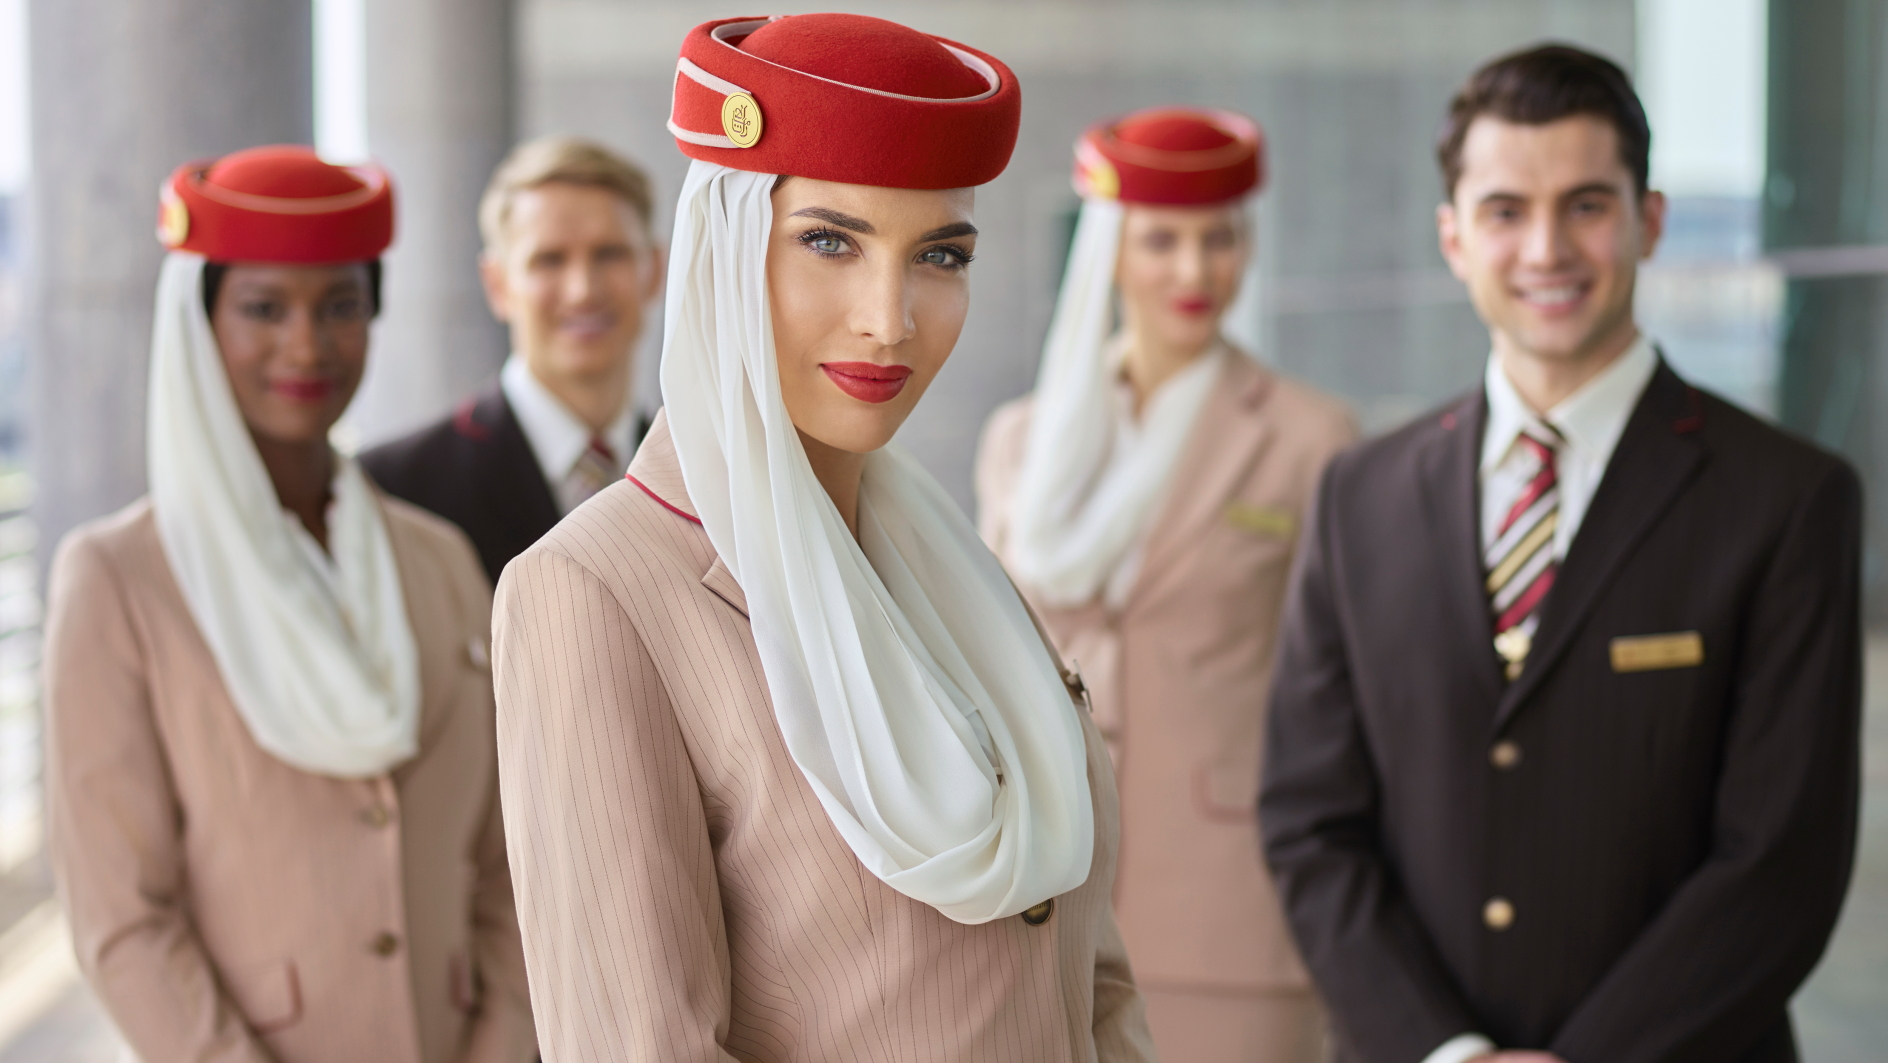 Emirates has launched a worldwide campaign to recruit 3,000 cabin crew and 500 airport services employees to join its Dubai hub over the next six months. Click to enlarge.